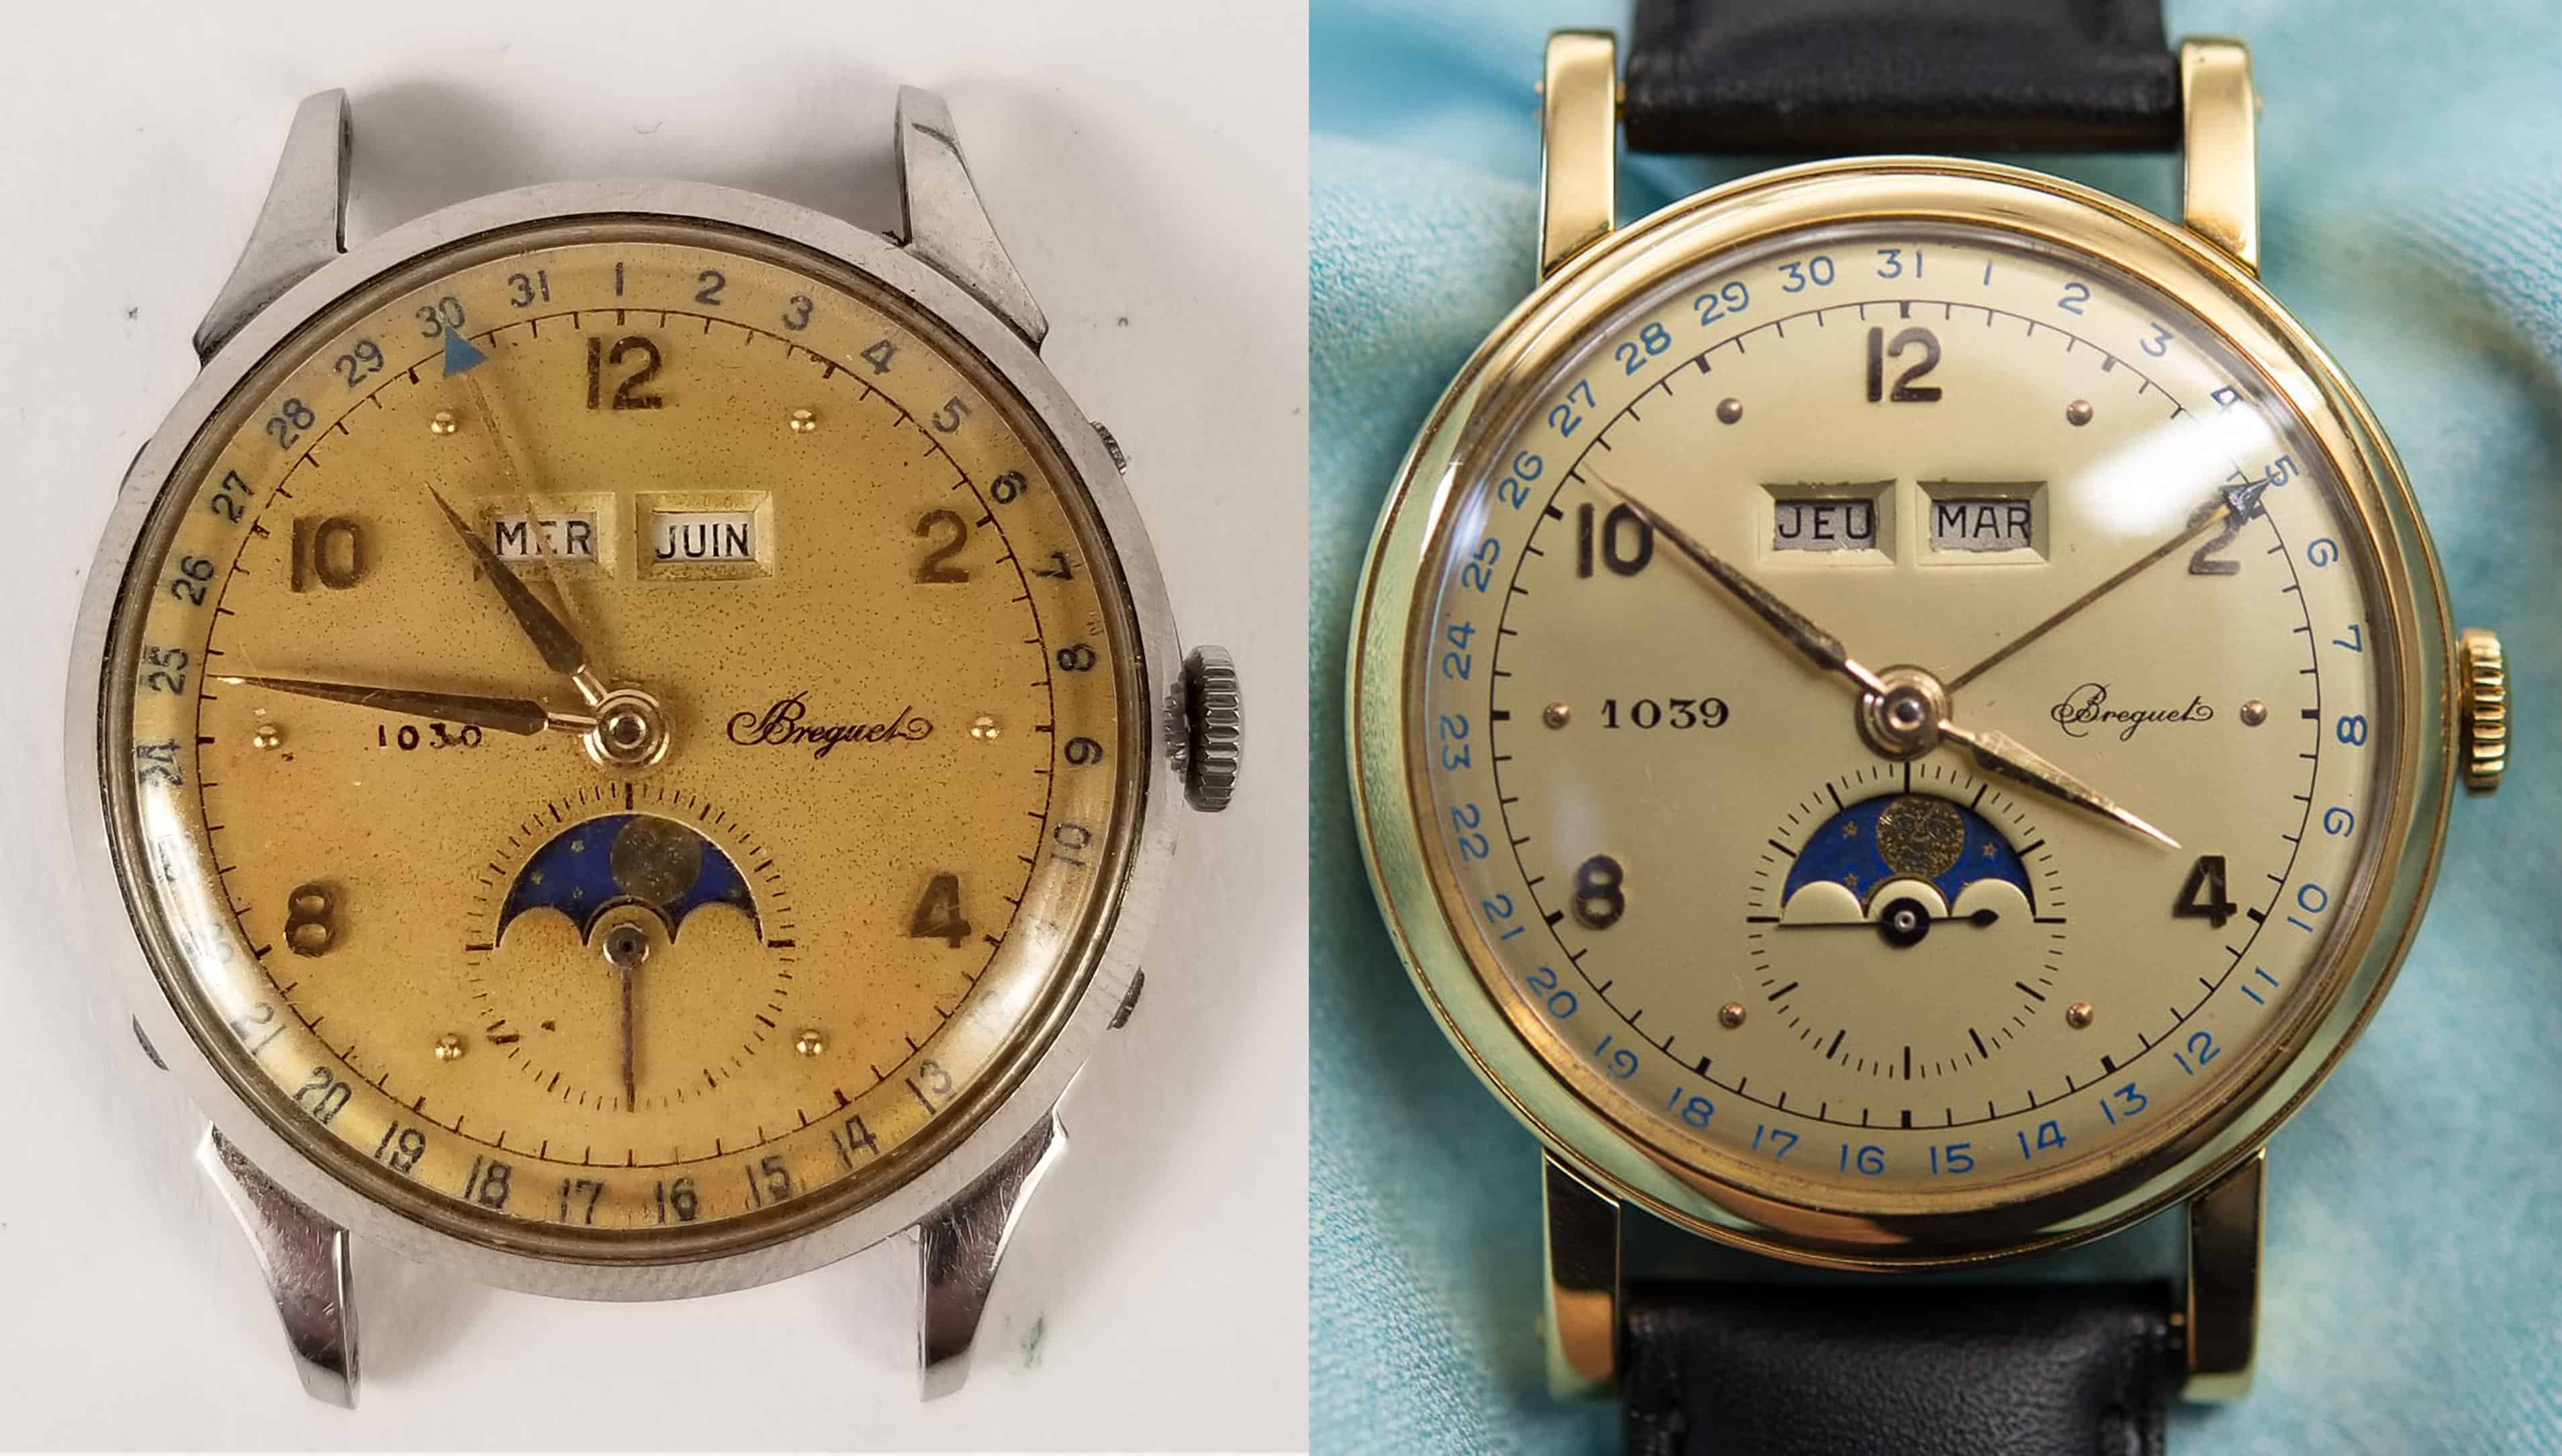 The Backyard Breguet: How an Exceedingly Rare Watch Made it to Auction